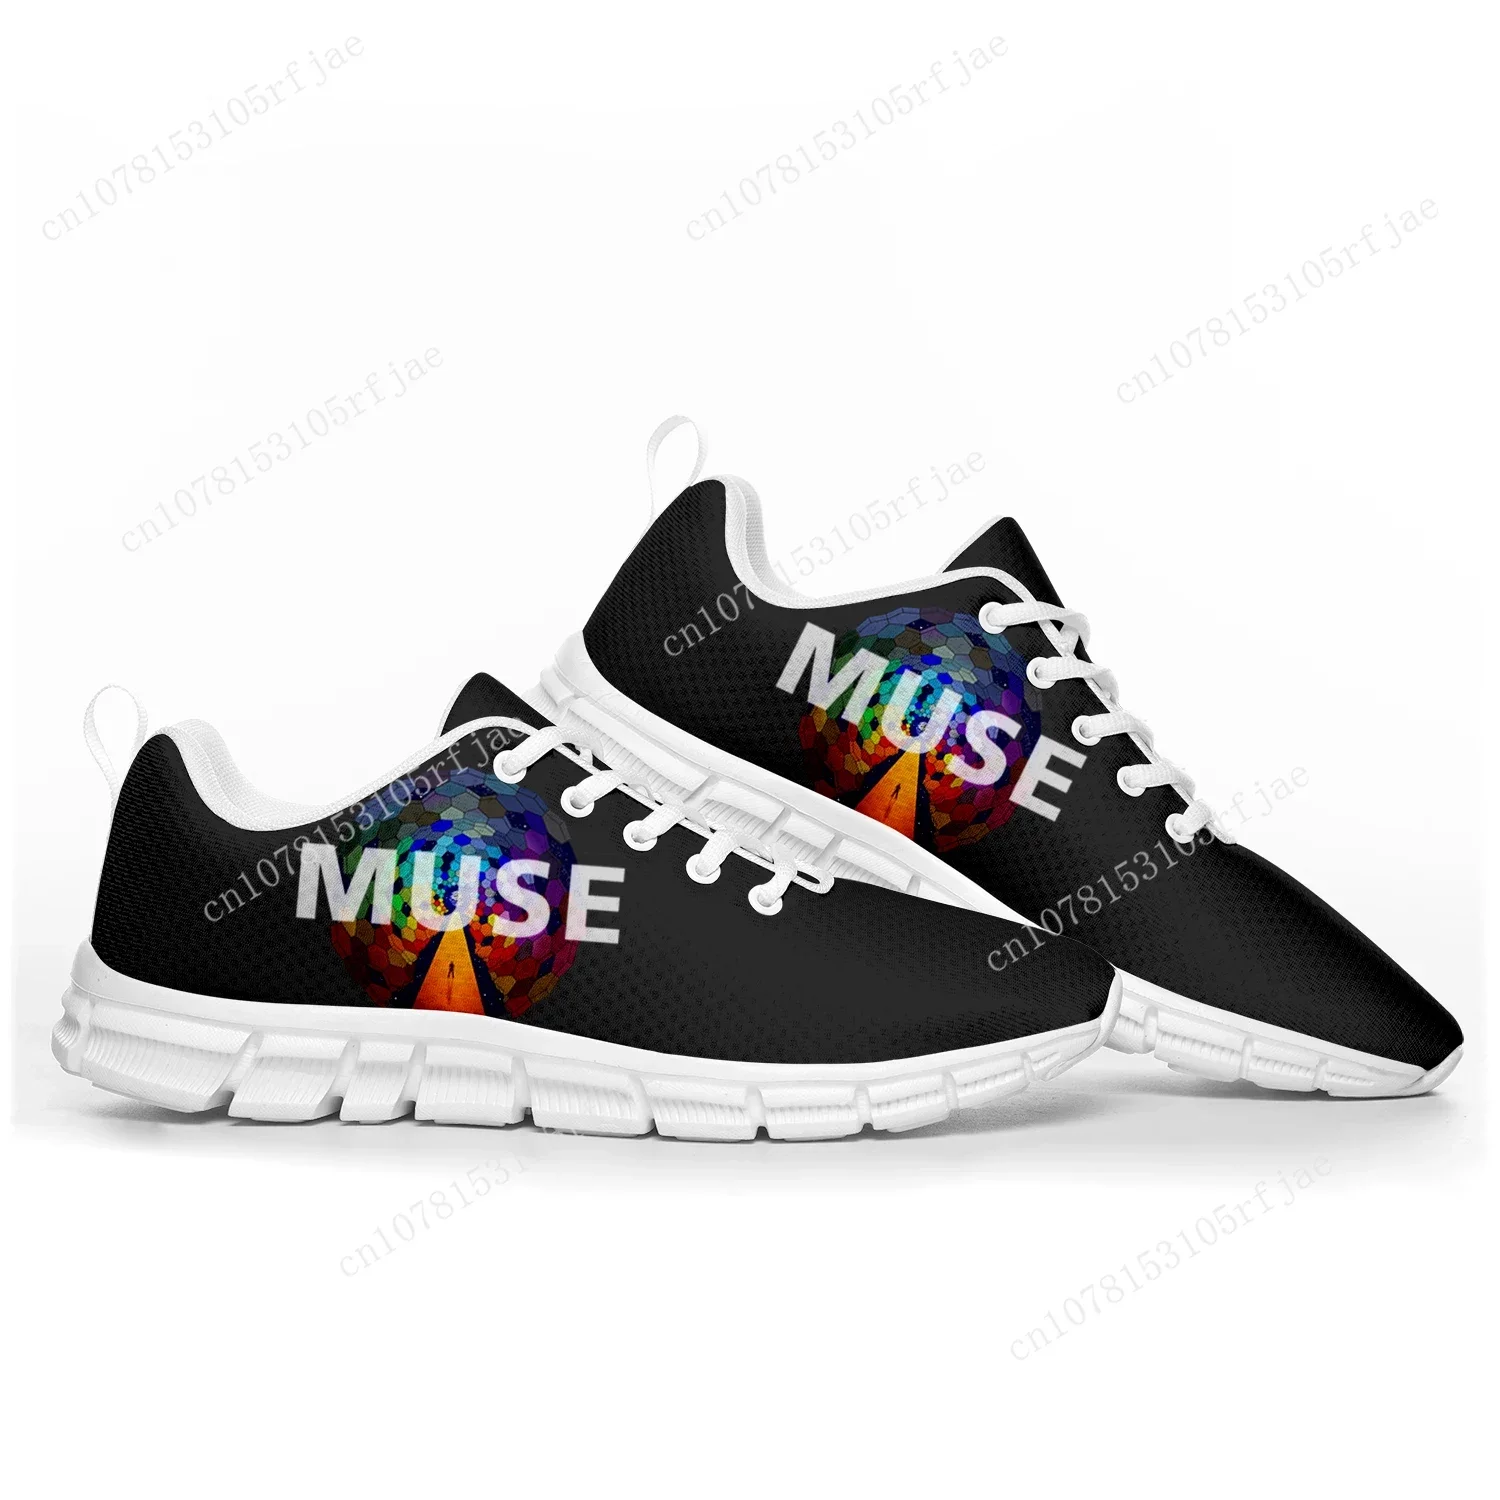 

Muse Rock Band England Sports Shoes Mens Womens Teenager Kids Children Sneakers Casual Custom High Quality Couple Shoes White